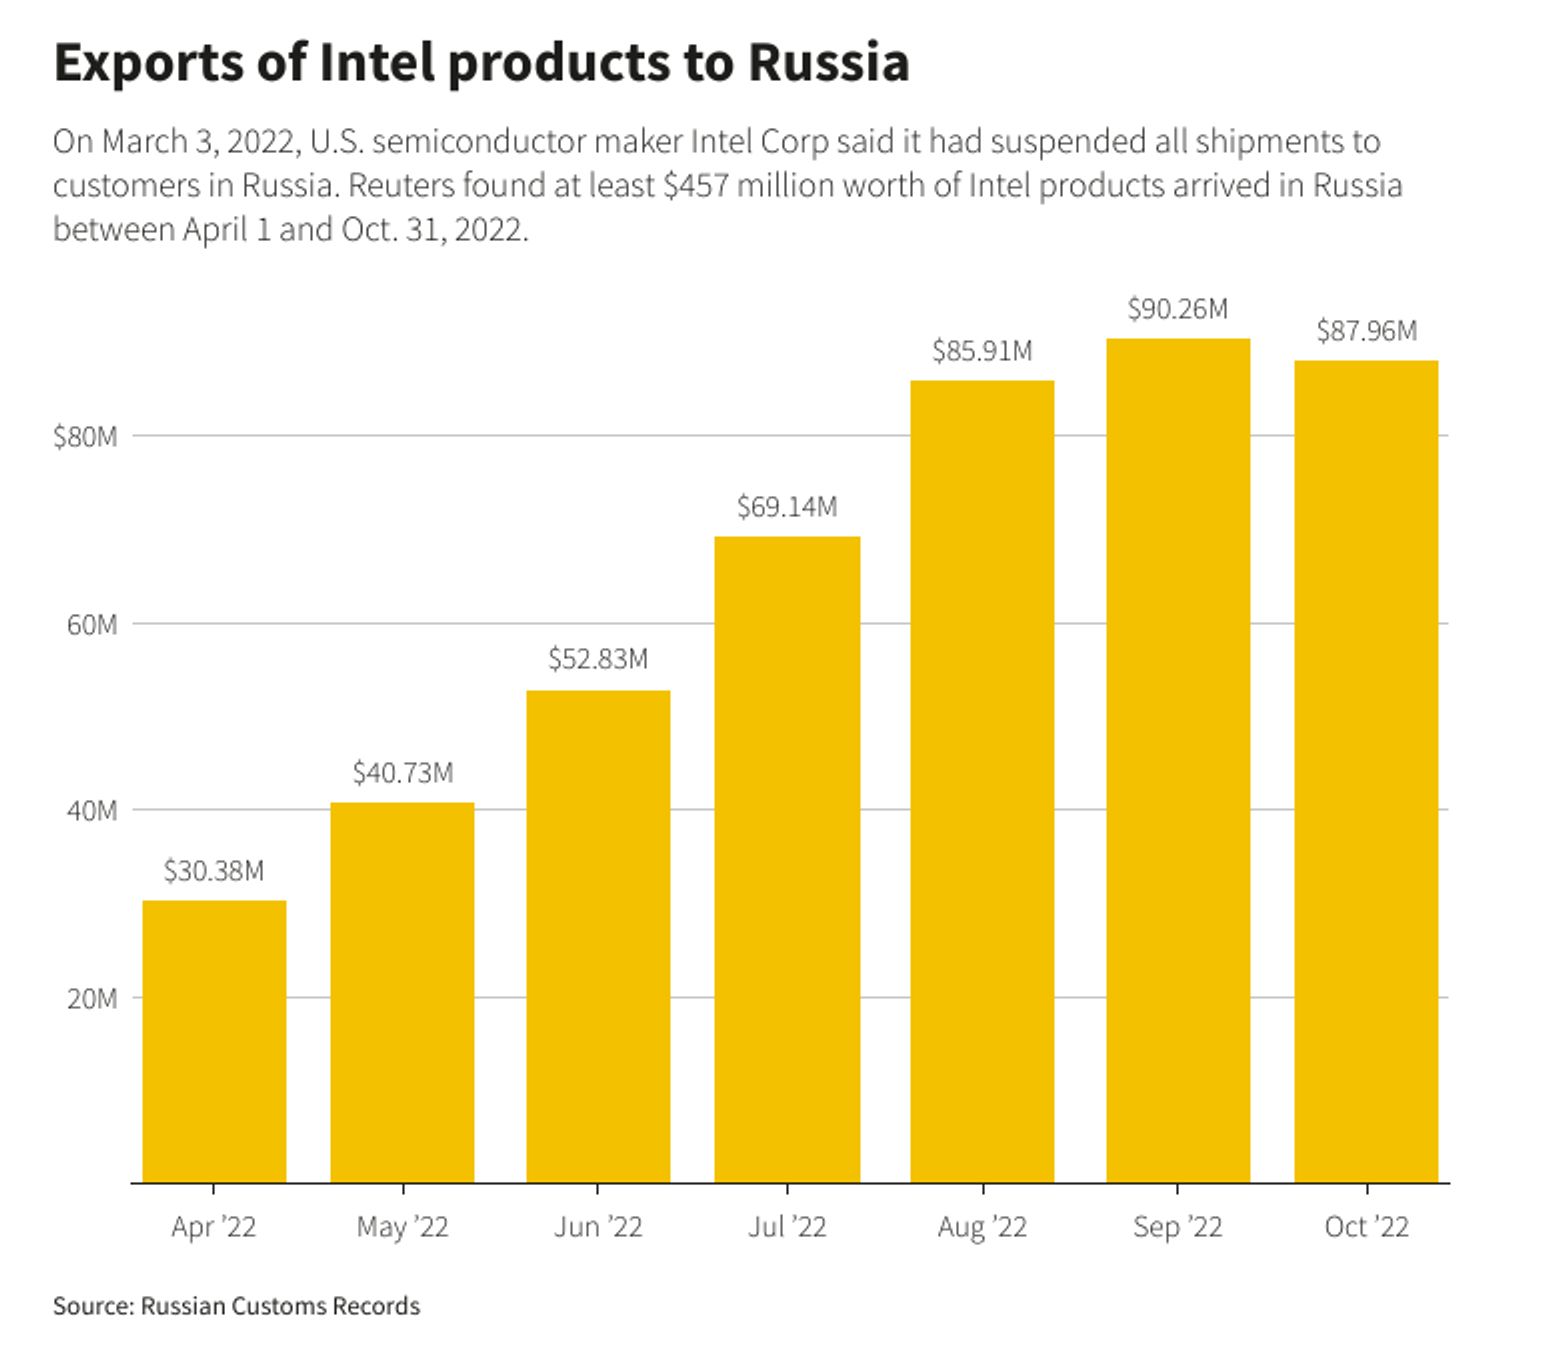 Imports of Intel products into Russia from April to October 2022